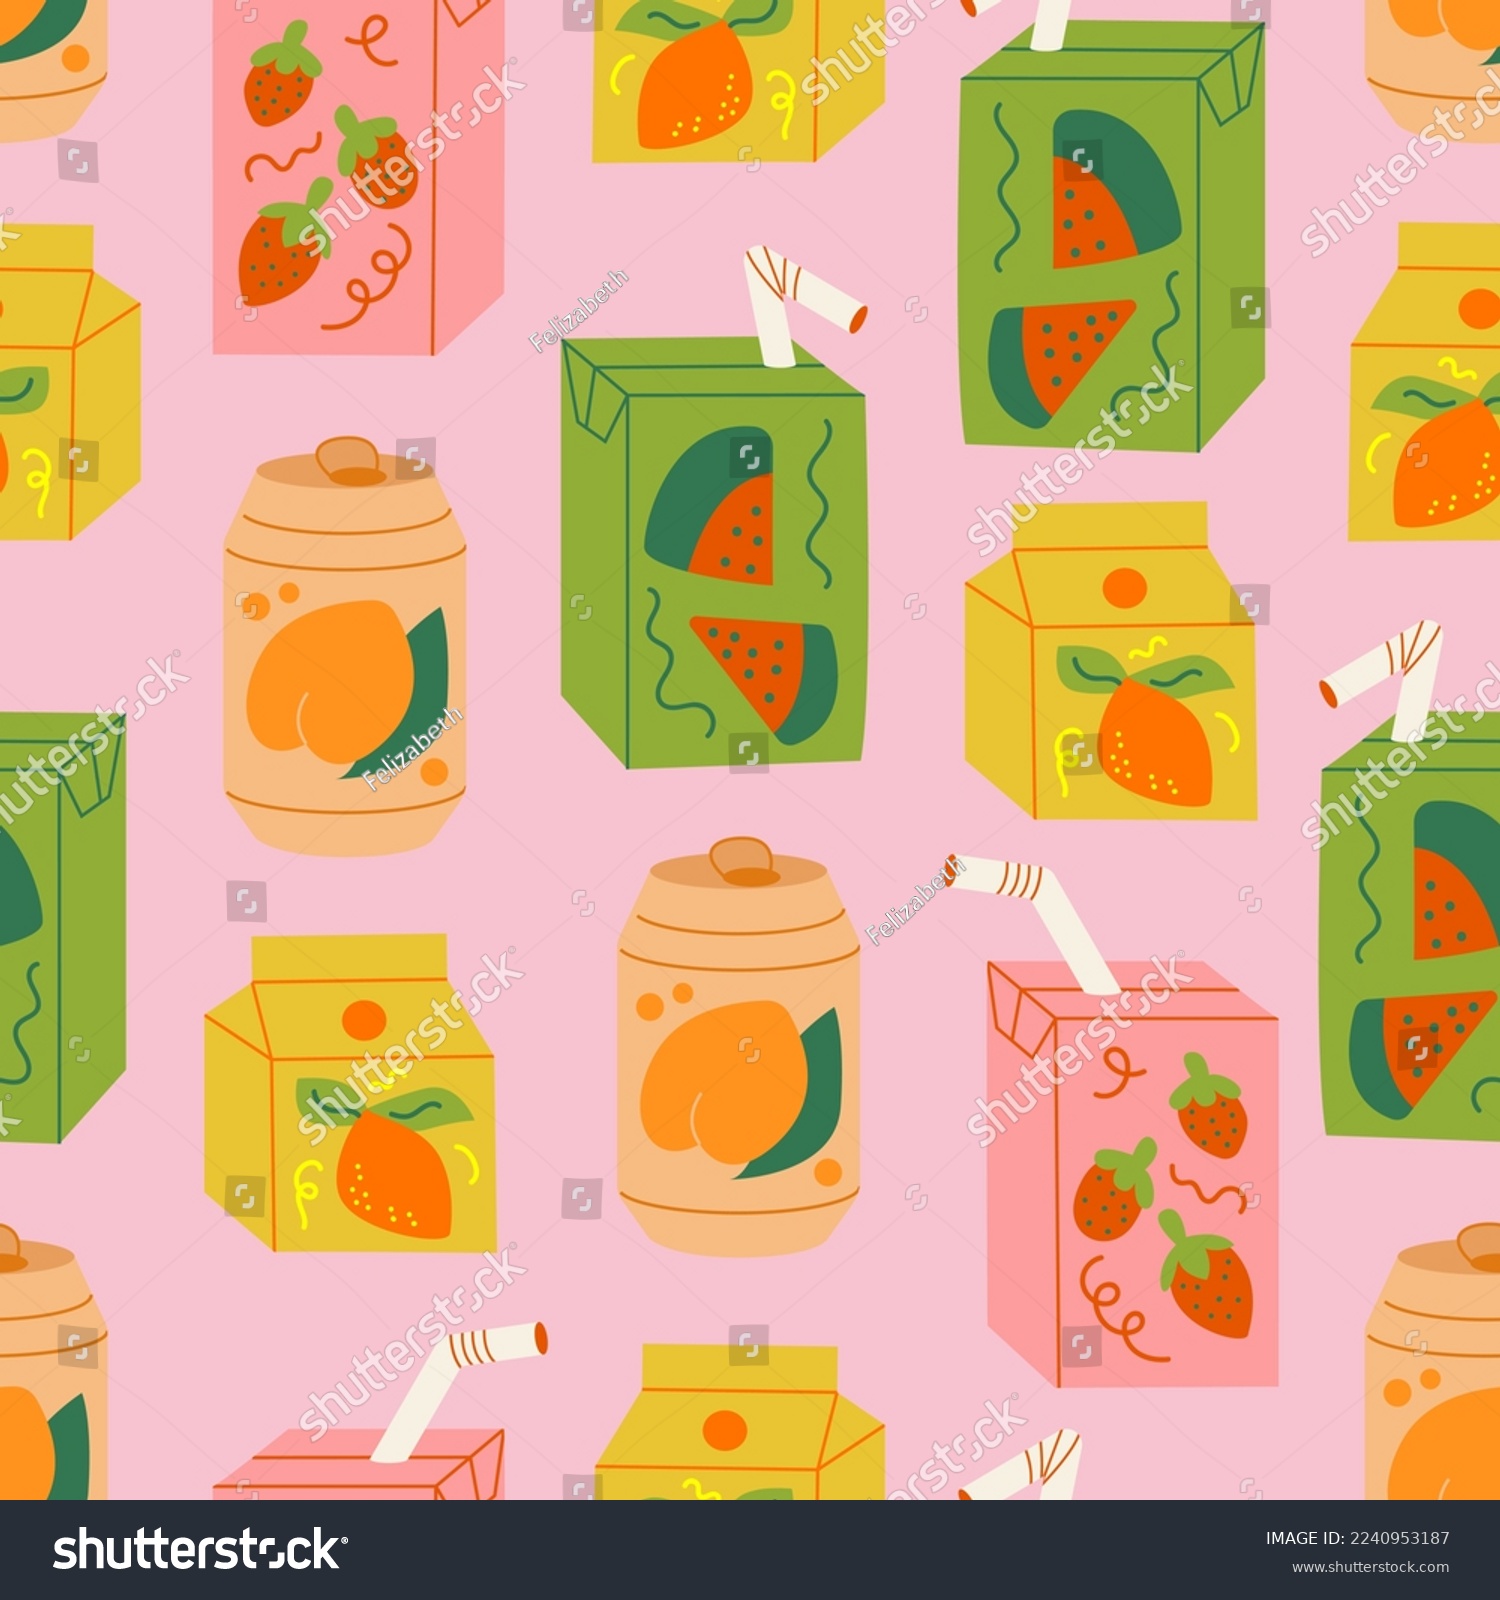 SVG of Seamless pattern with various asian drinks with different fruit flavors. Packets of juice, soda cans and milk boxes. Cute vector flat background svg